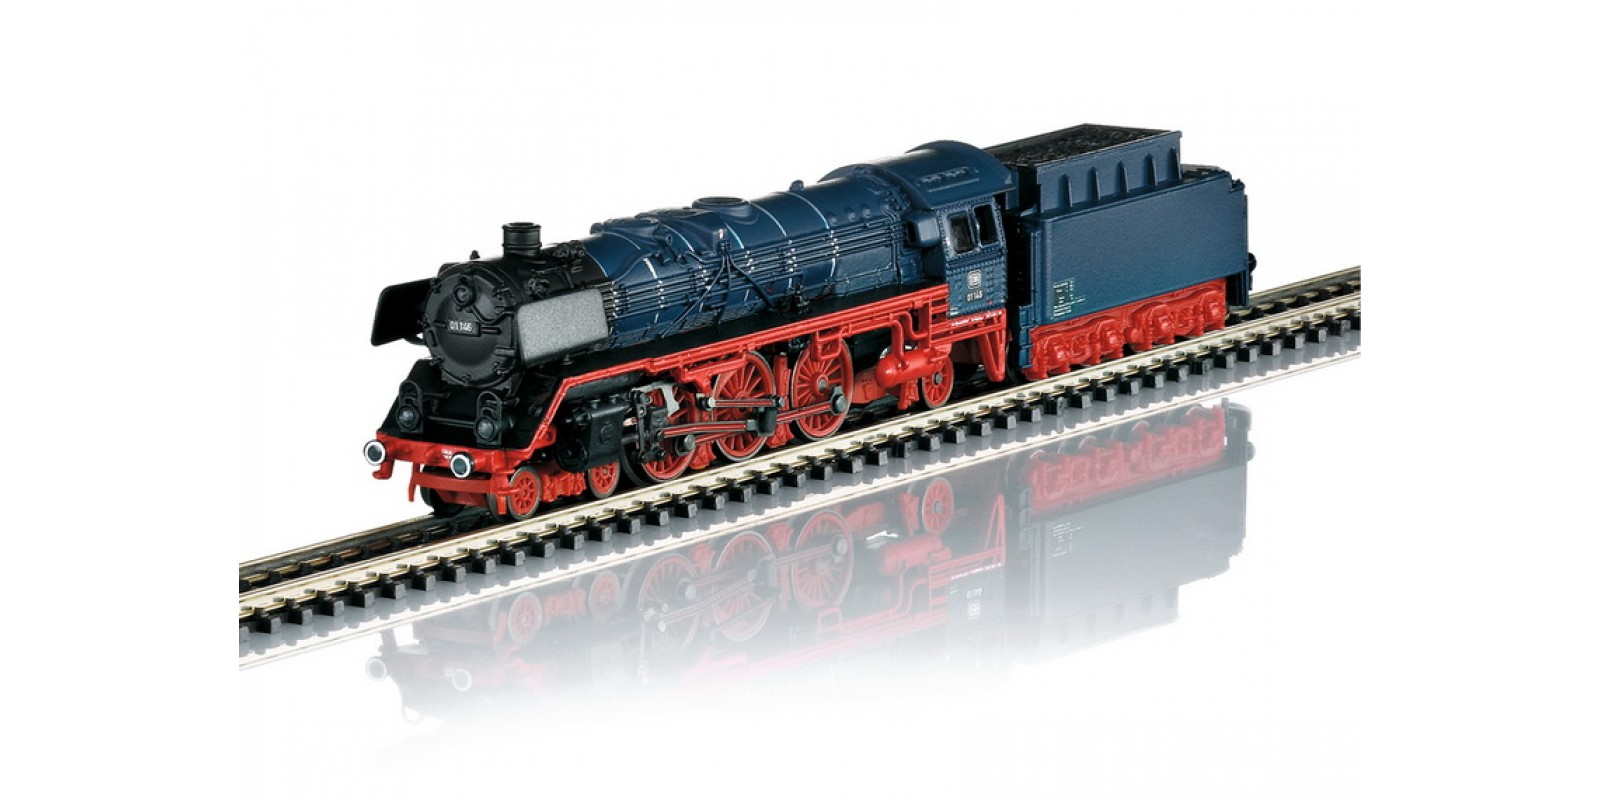 88012 Class 01 DB Steam Locomotive with a Tender